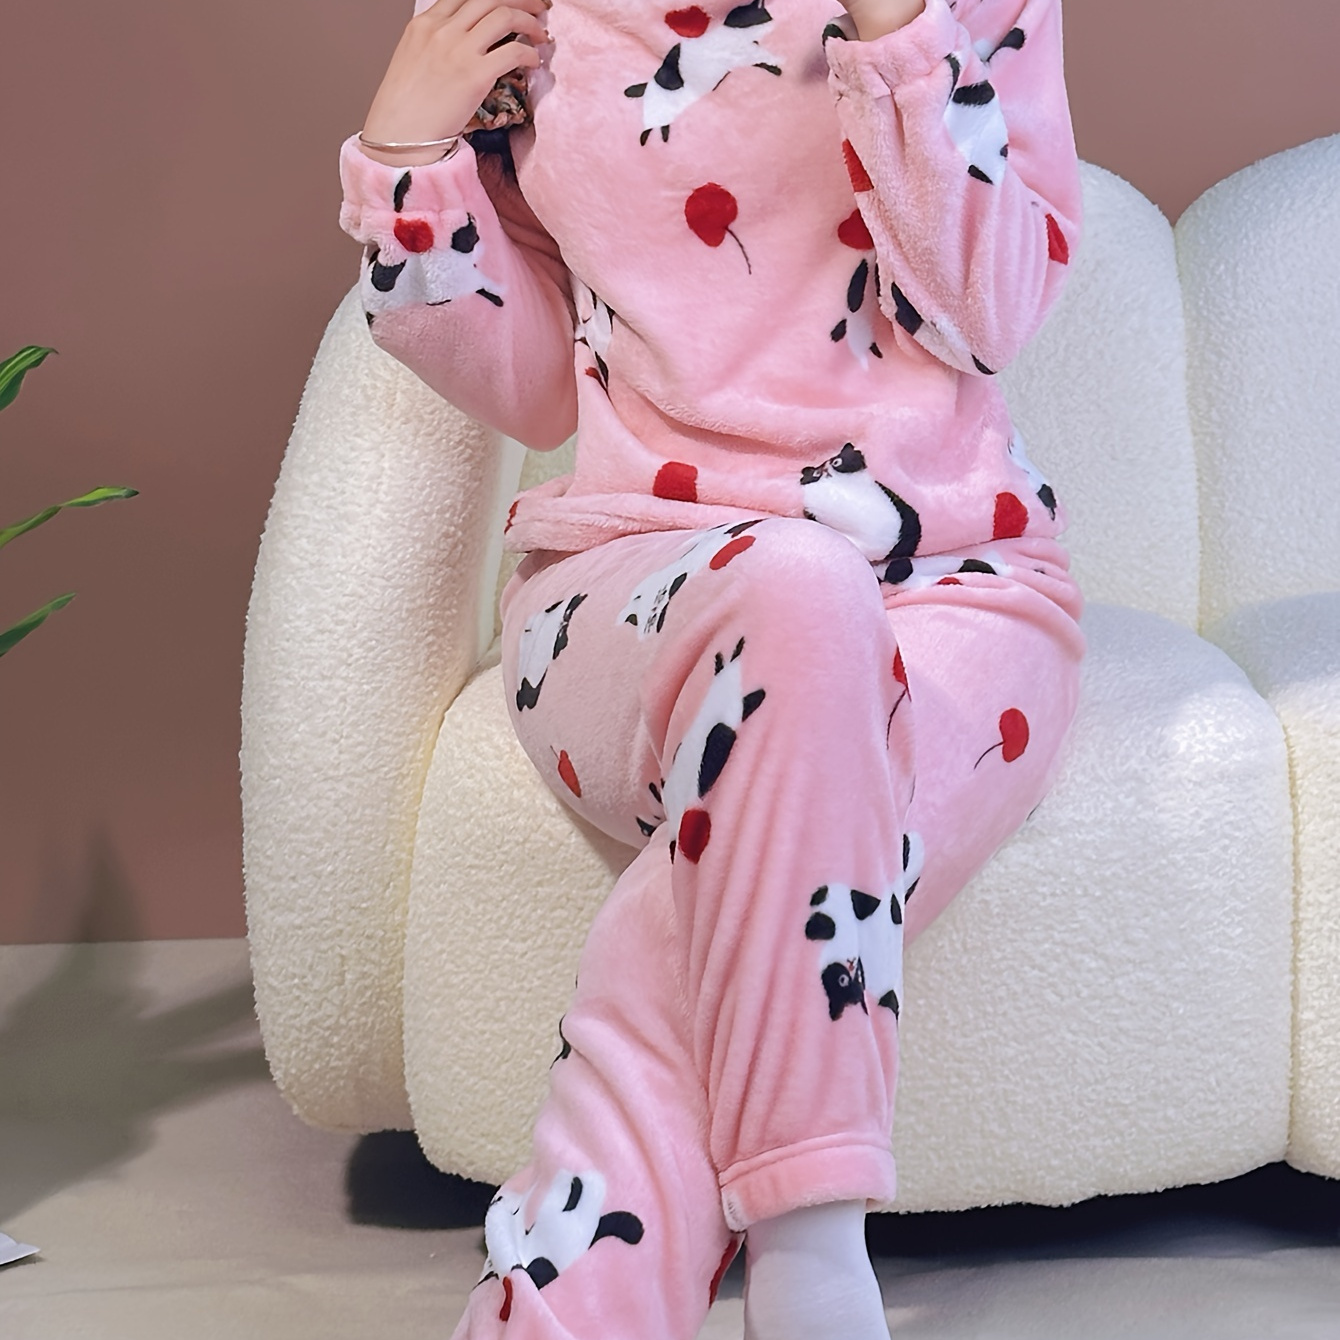 

Women's Cartoon Cat & Cherry Print Cute Fleece Thickened Pajama Set, Long Sleeve Round Neck Top & Joggers, Comfortable Relaxed Fit For Fall & Winter